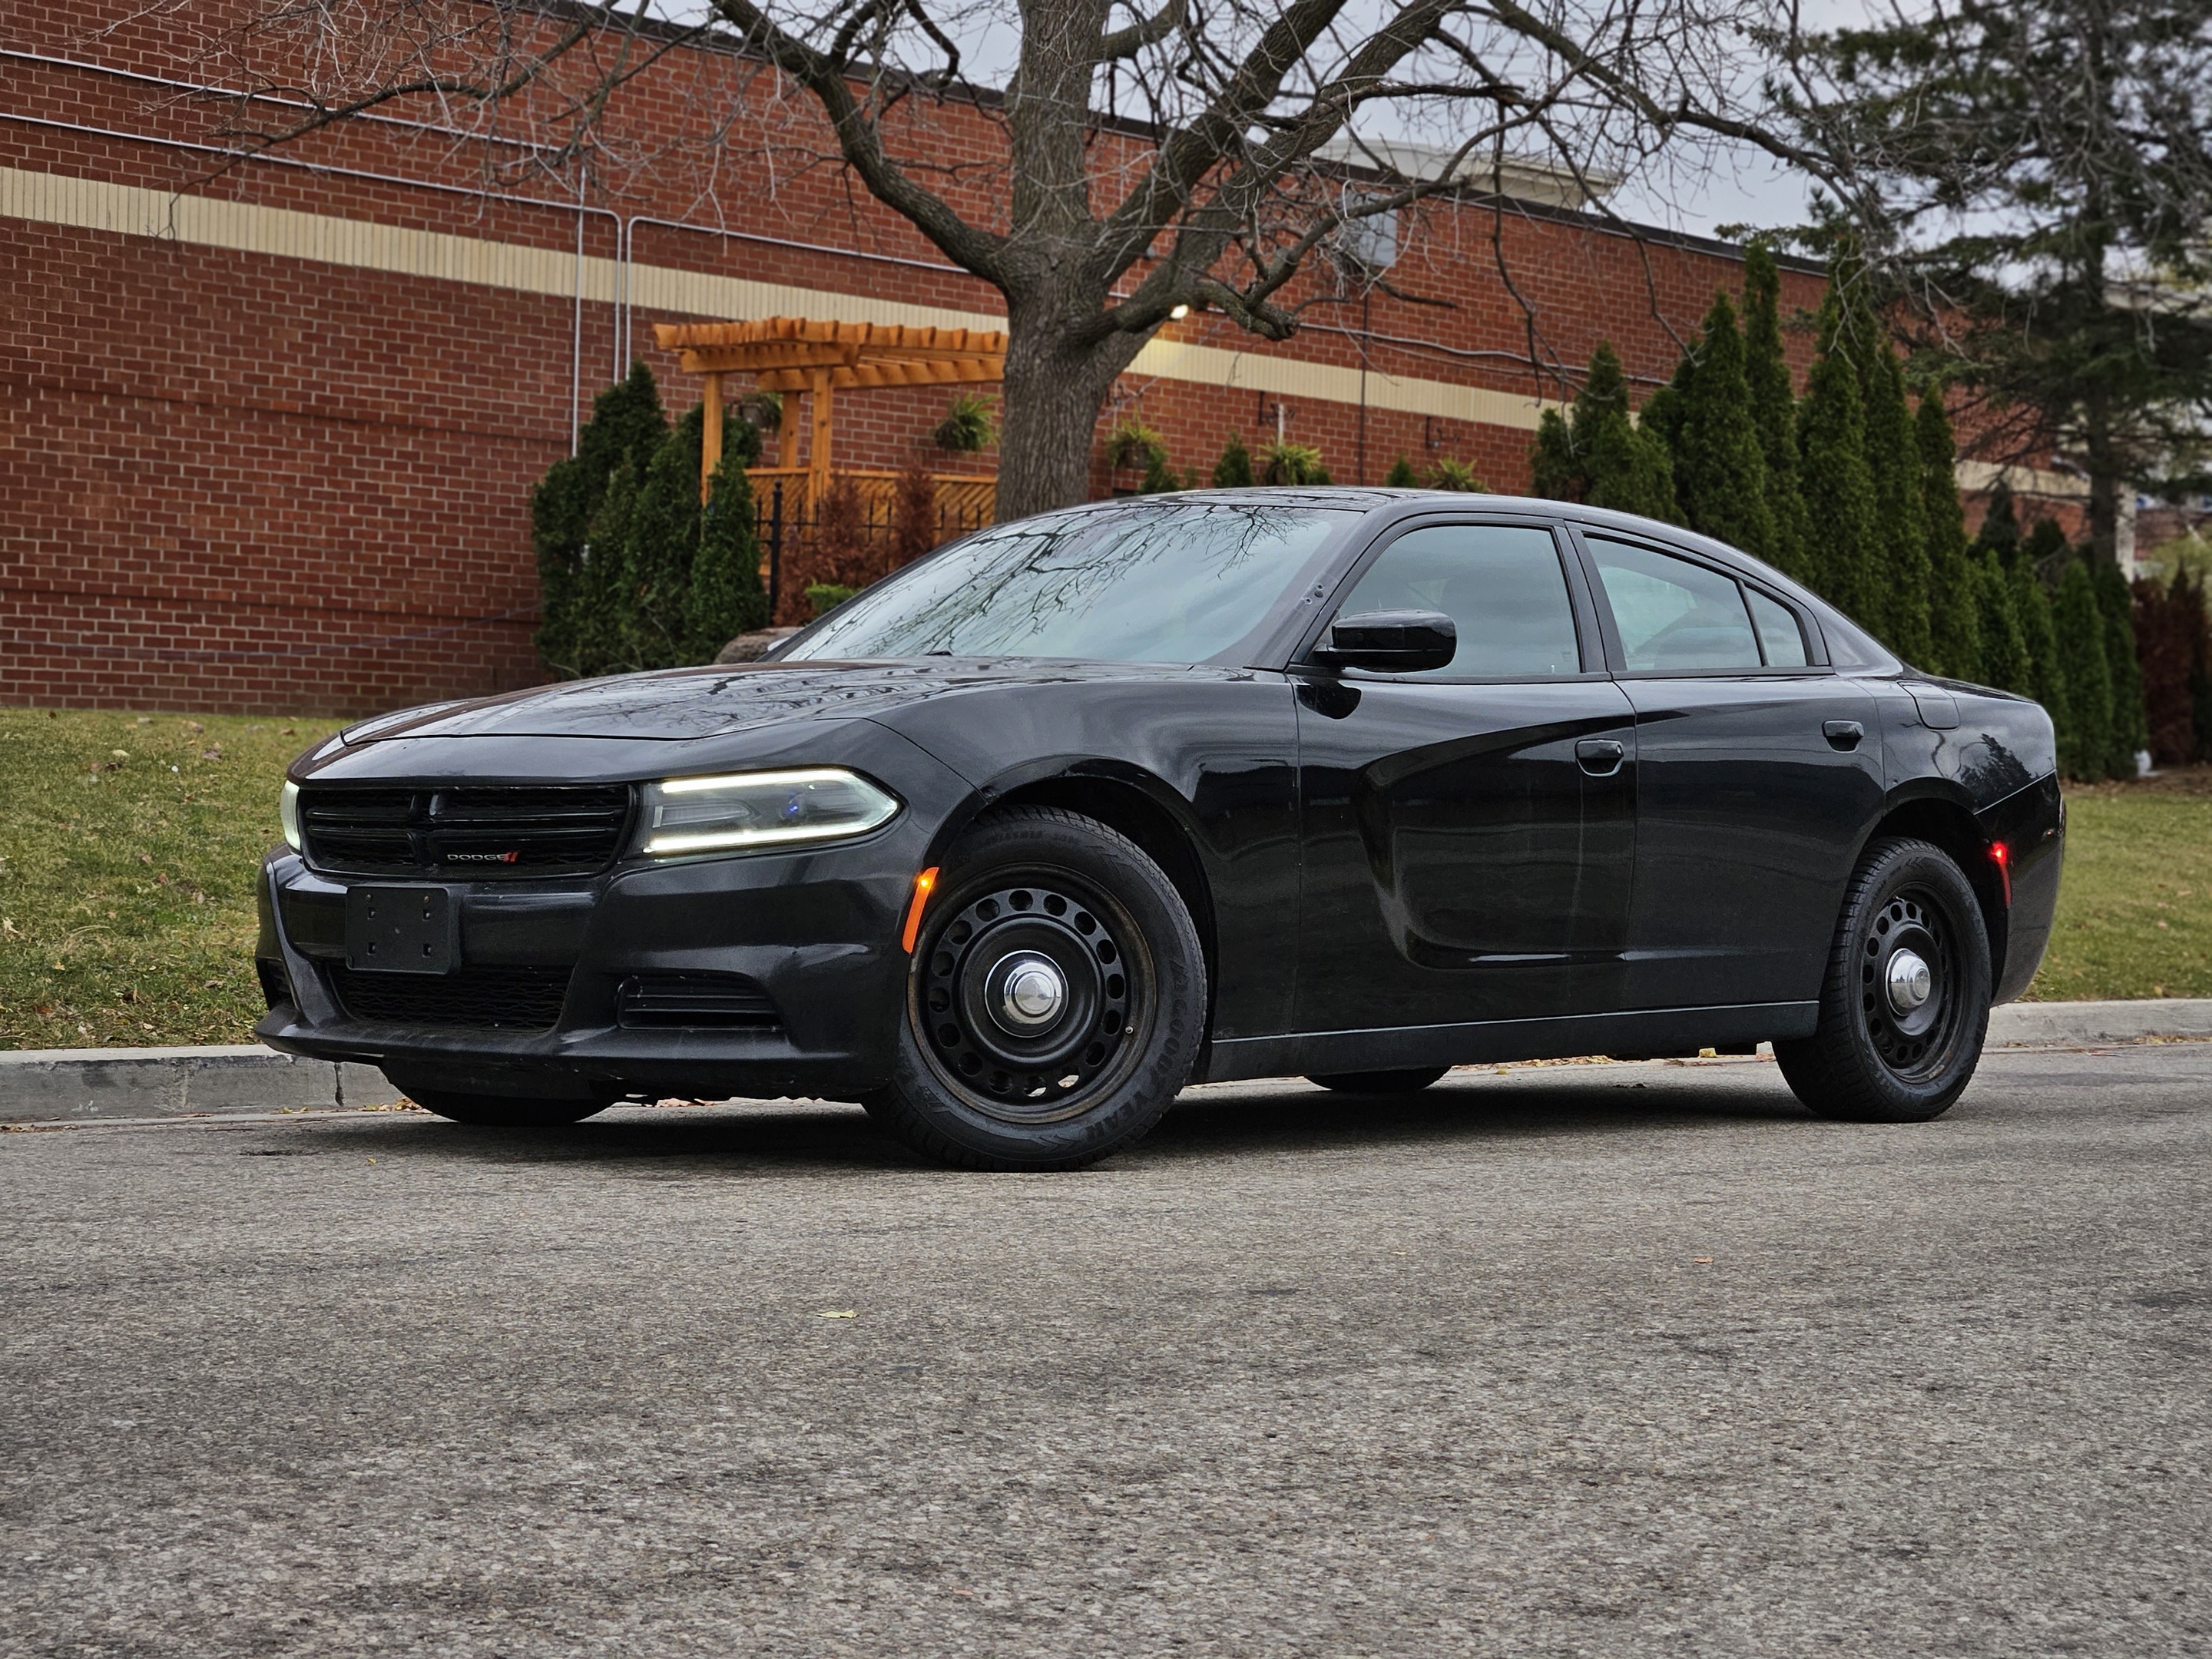 2016 Dodge Charger V8 Hemi-AWD**One Owner**More Options Available**